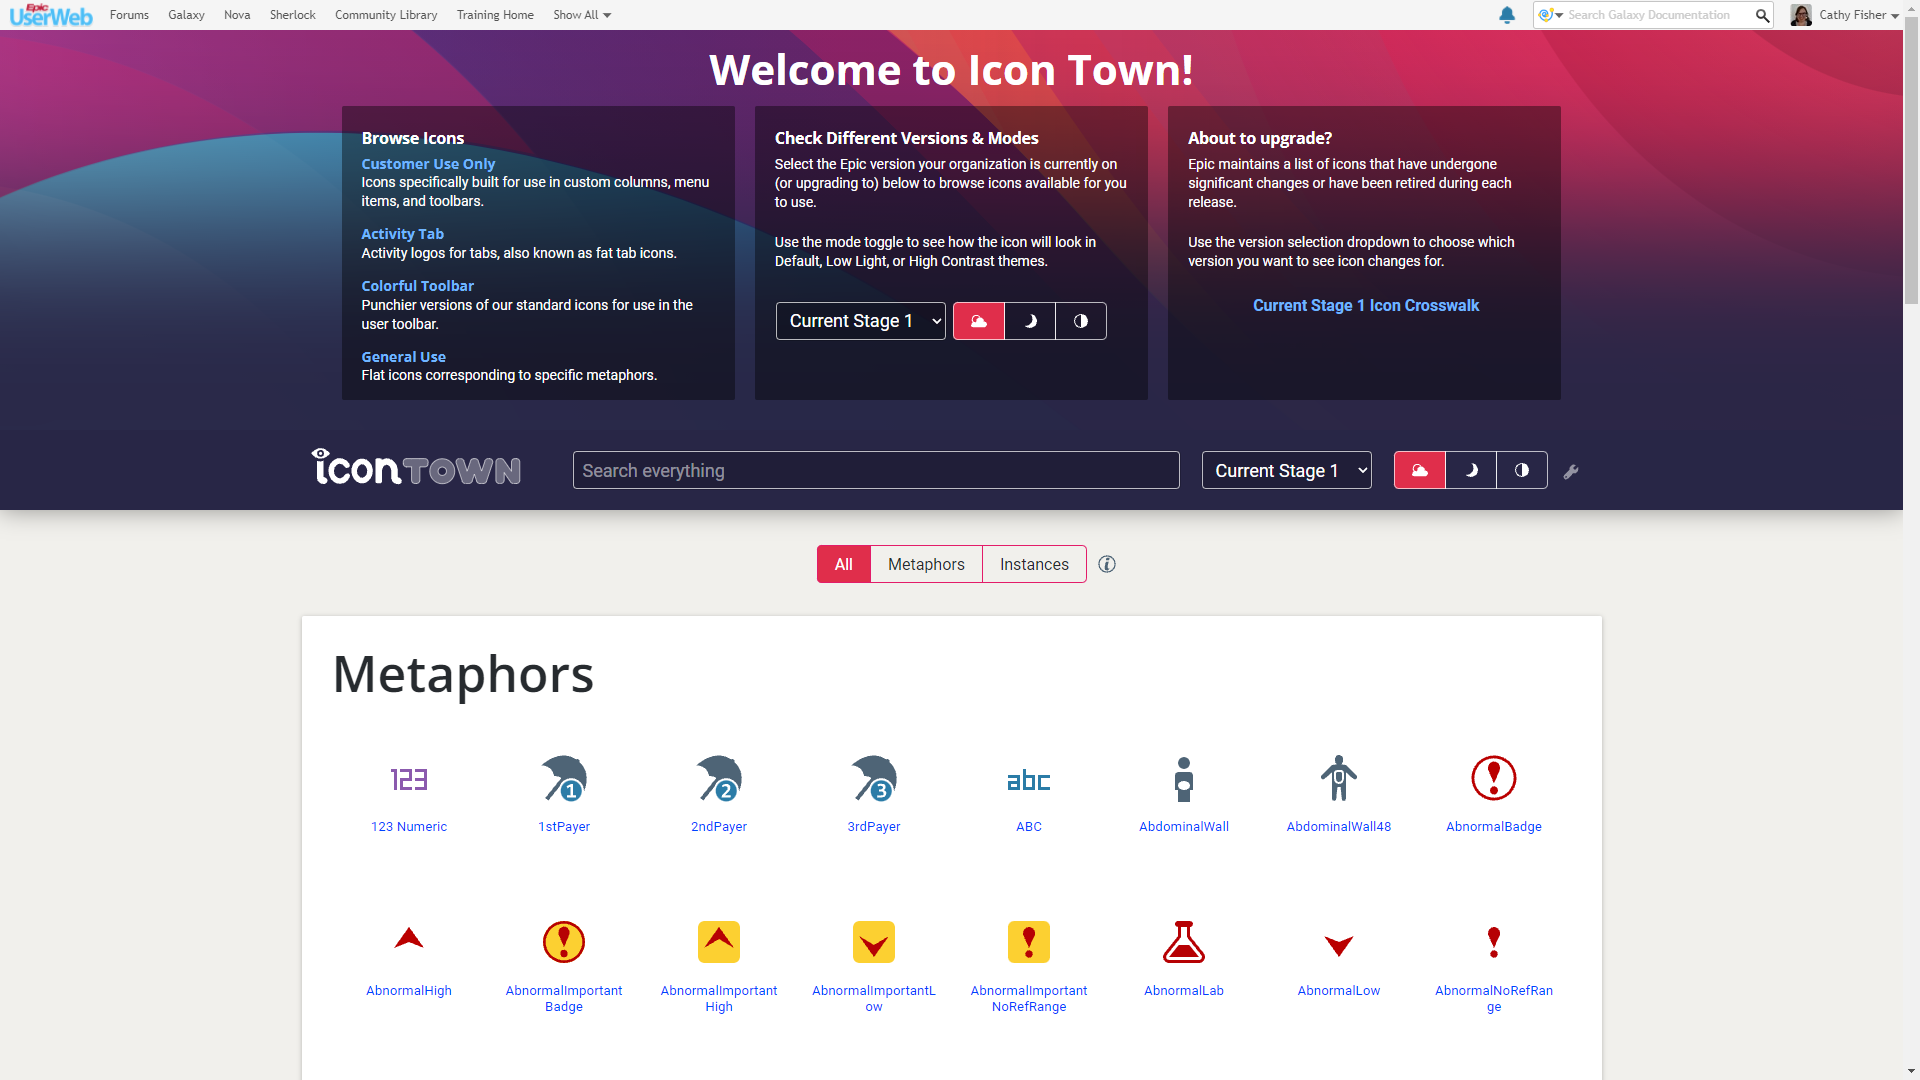 Icon Town's homepage